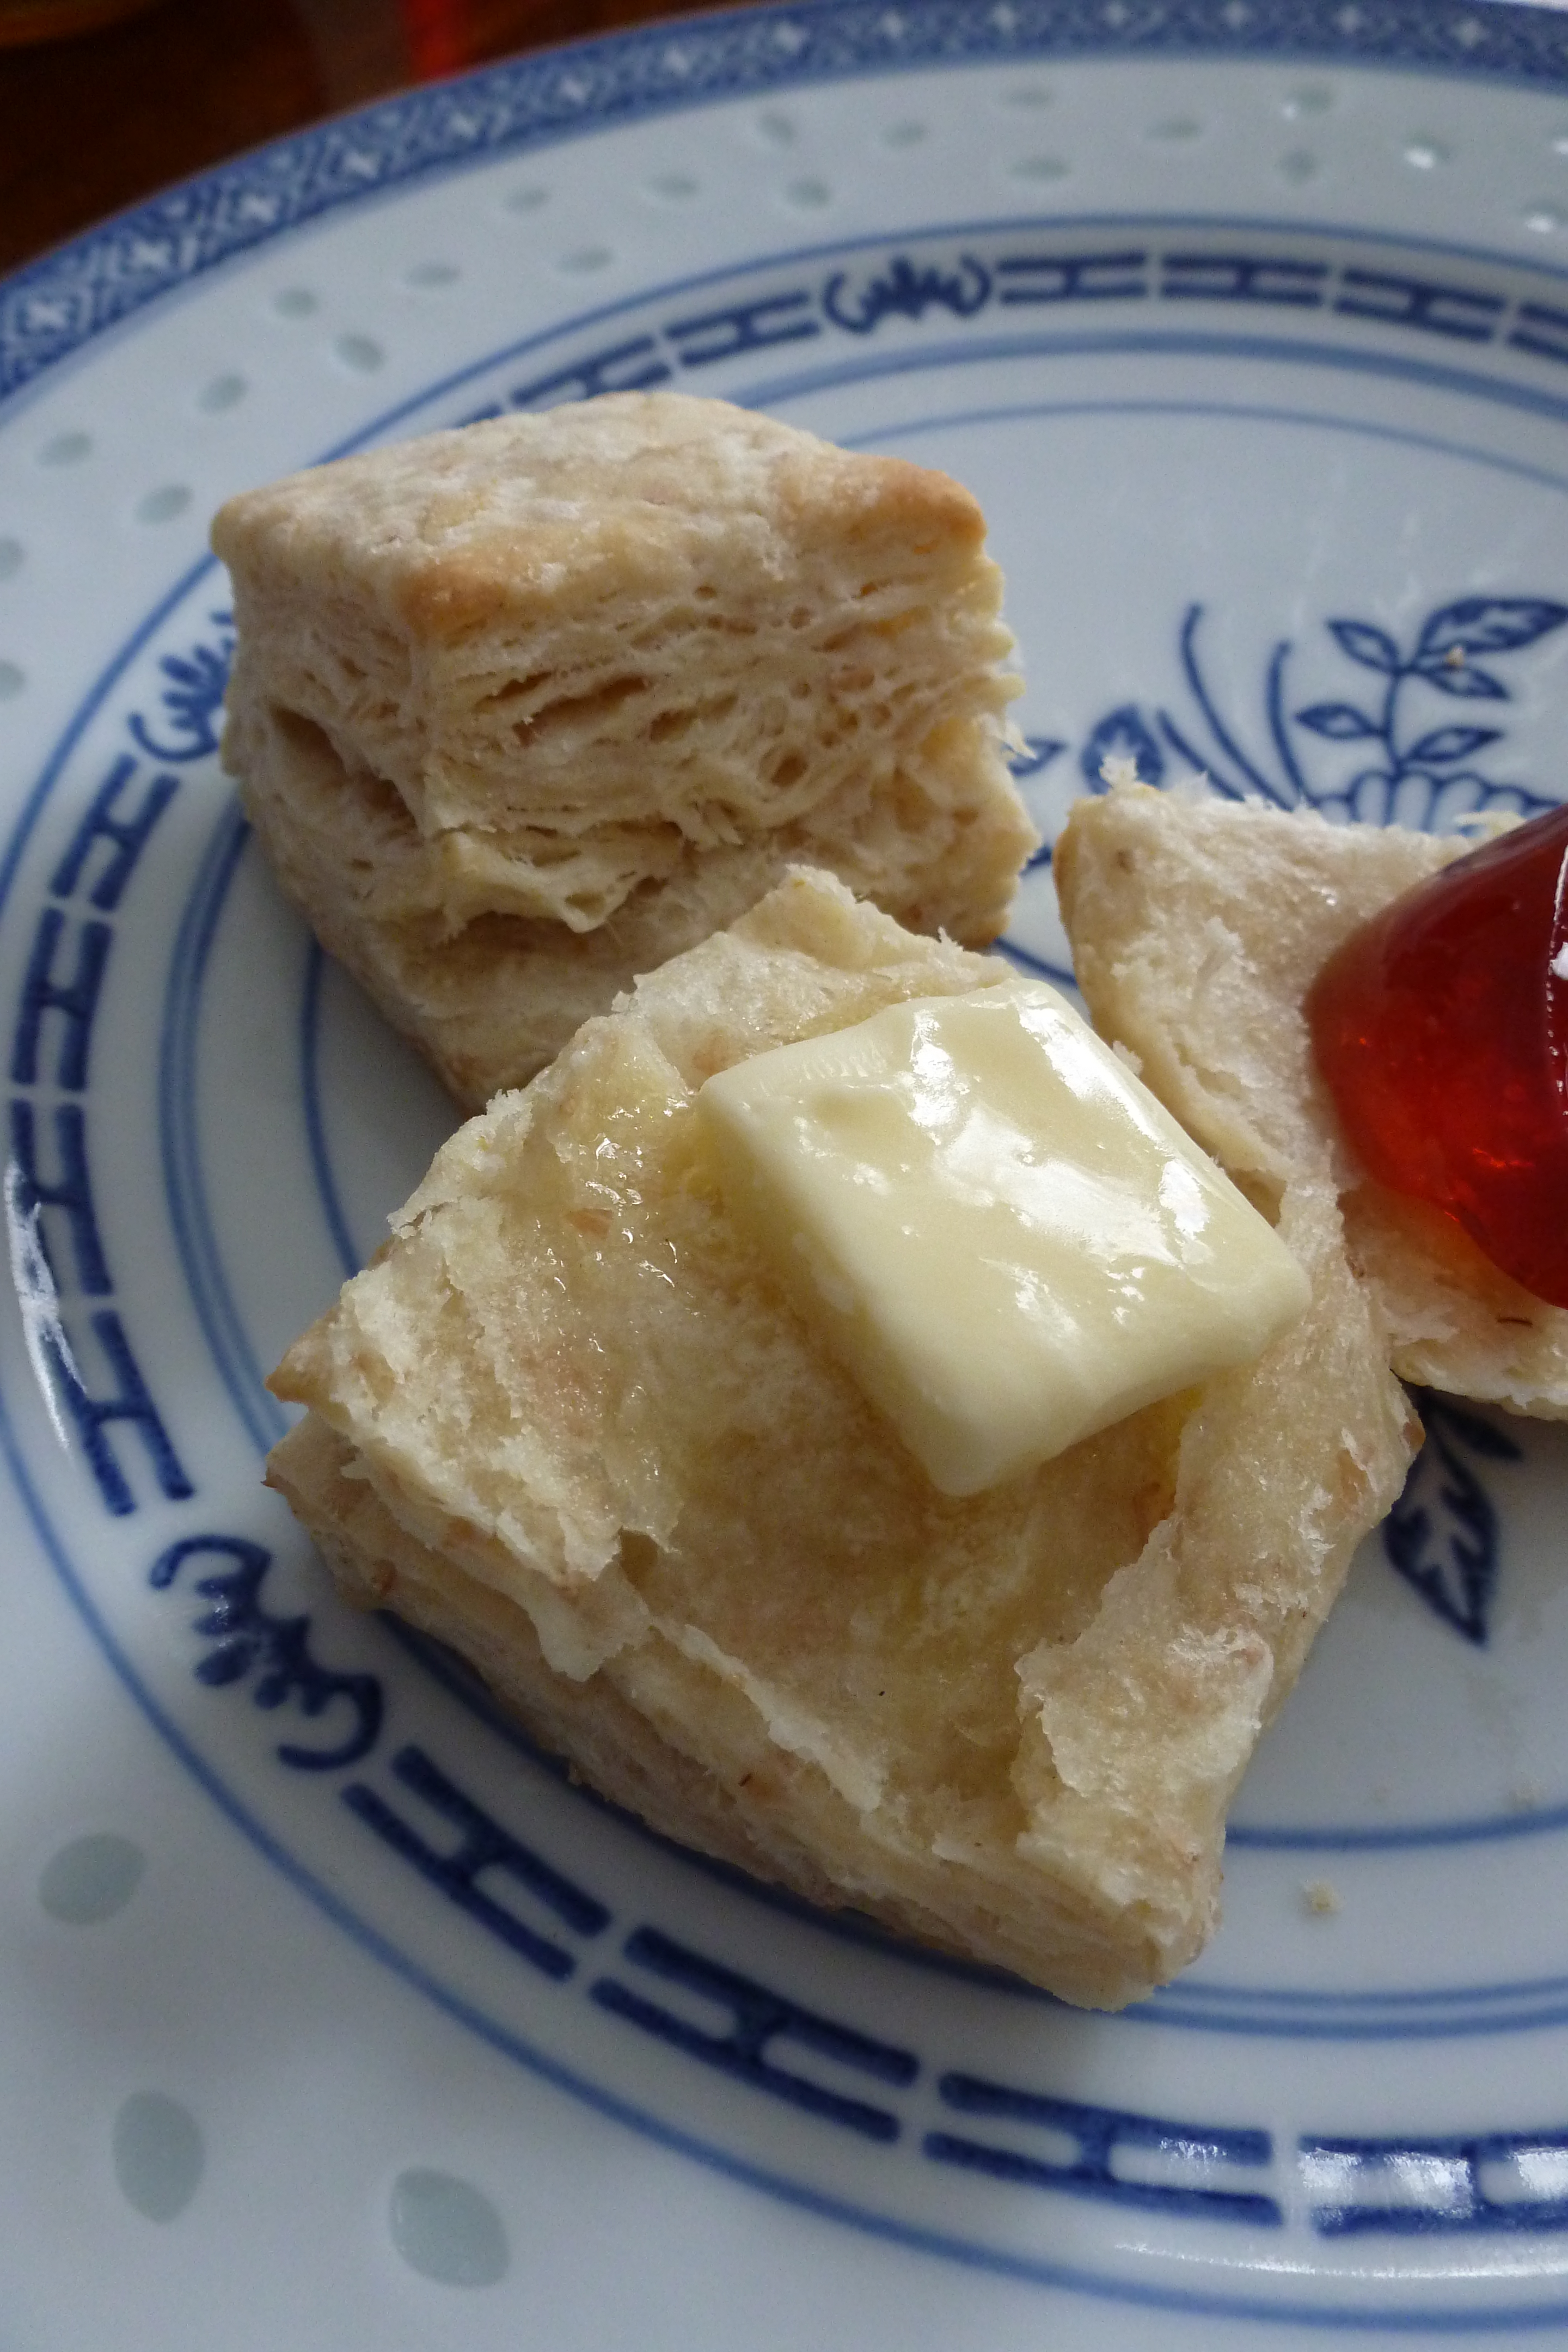 Biscuits with butter and crabapple jelly